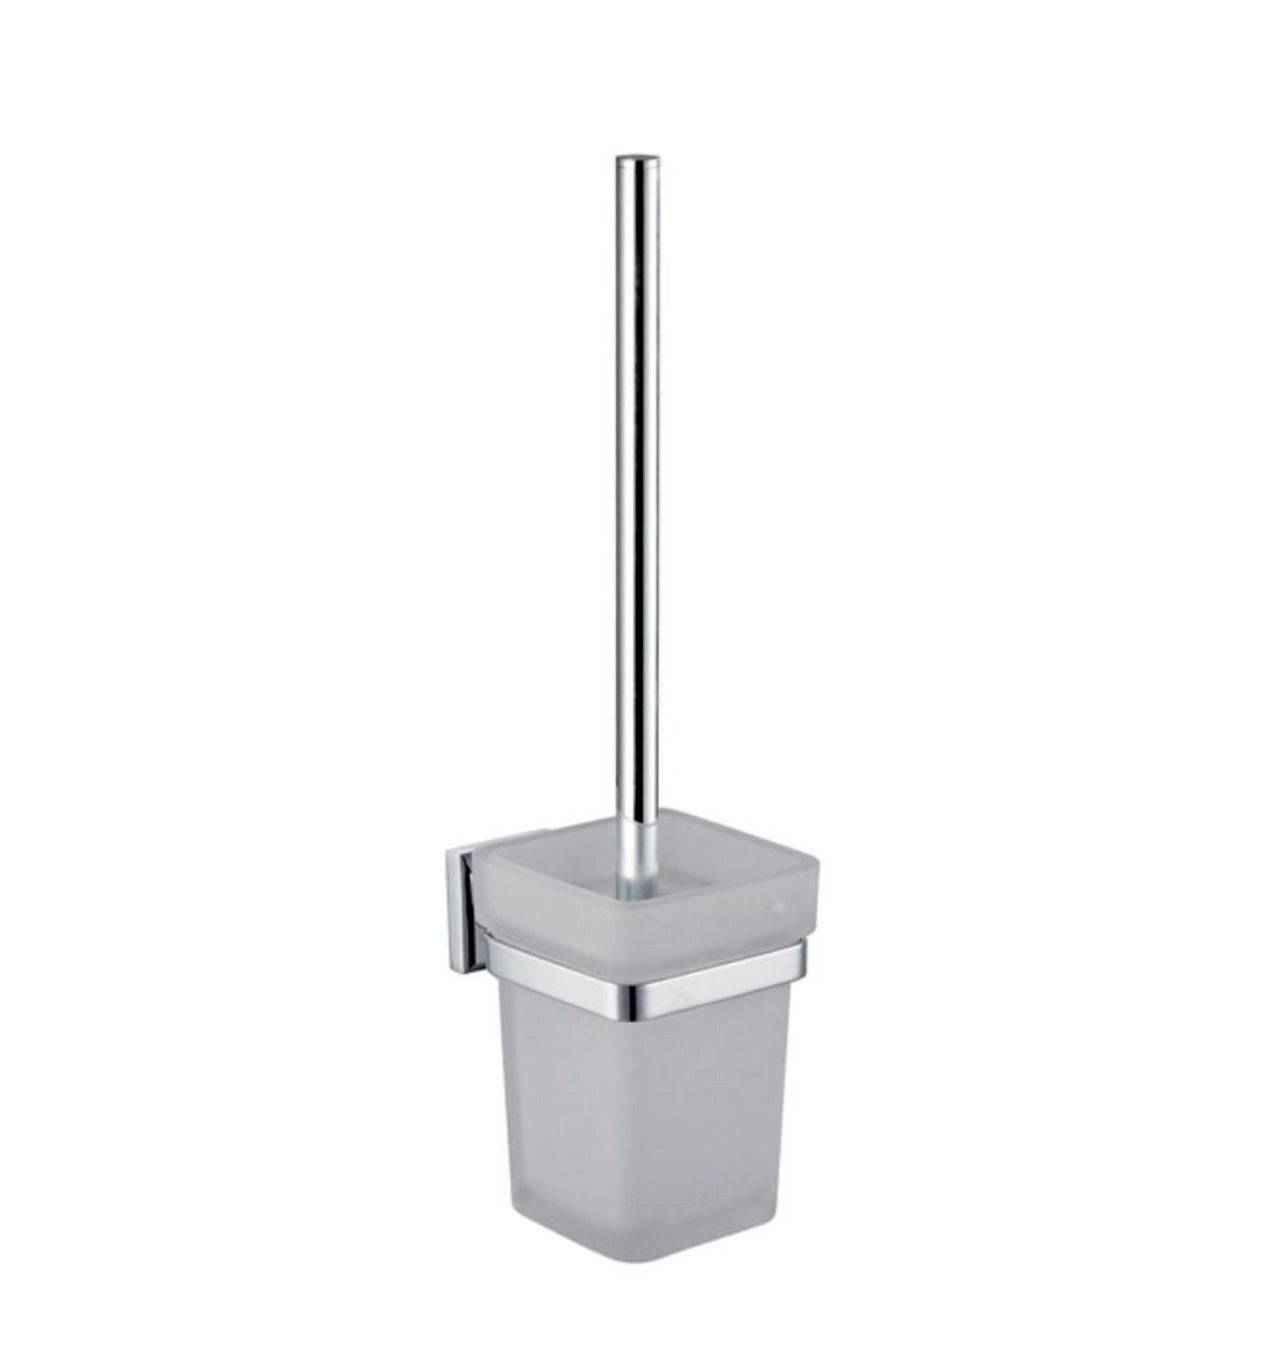 Kube Bath Aqua Nuon Toilet Brush With Frosted Glass Cup - Chrome - Renoz